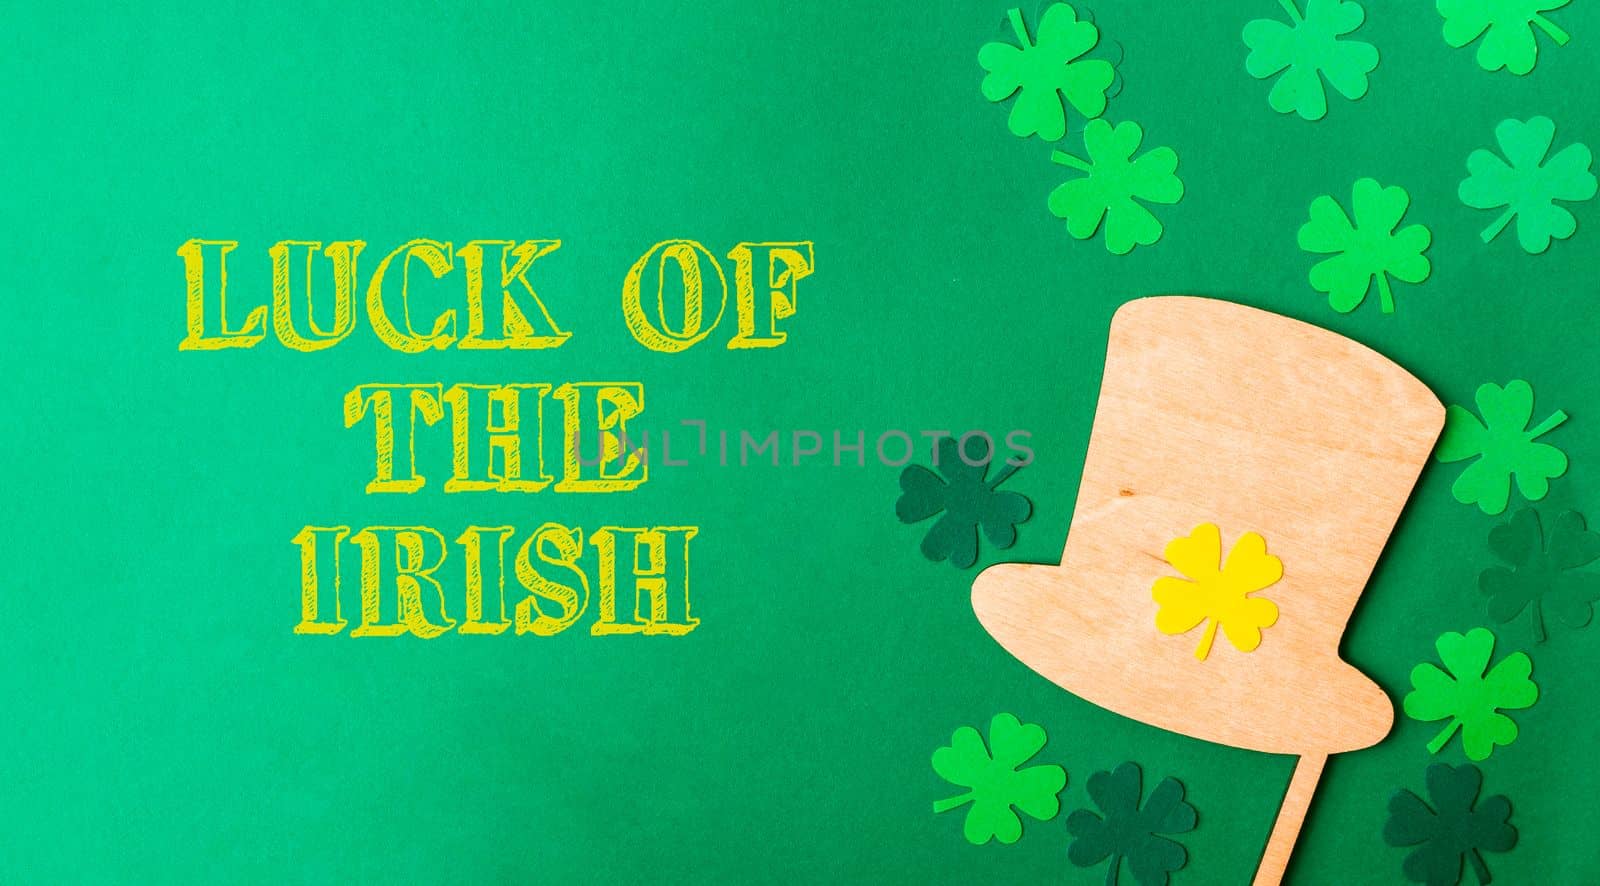 St. Patrick's Day greeting card with clover and leprechaun hat on green background